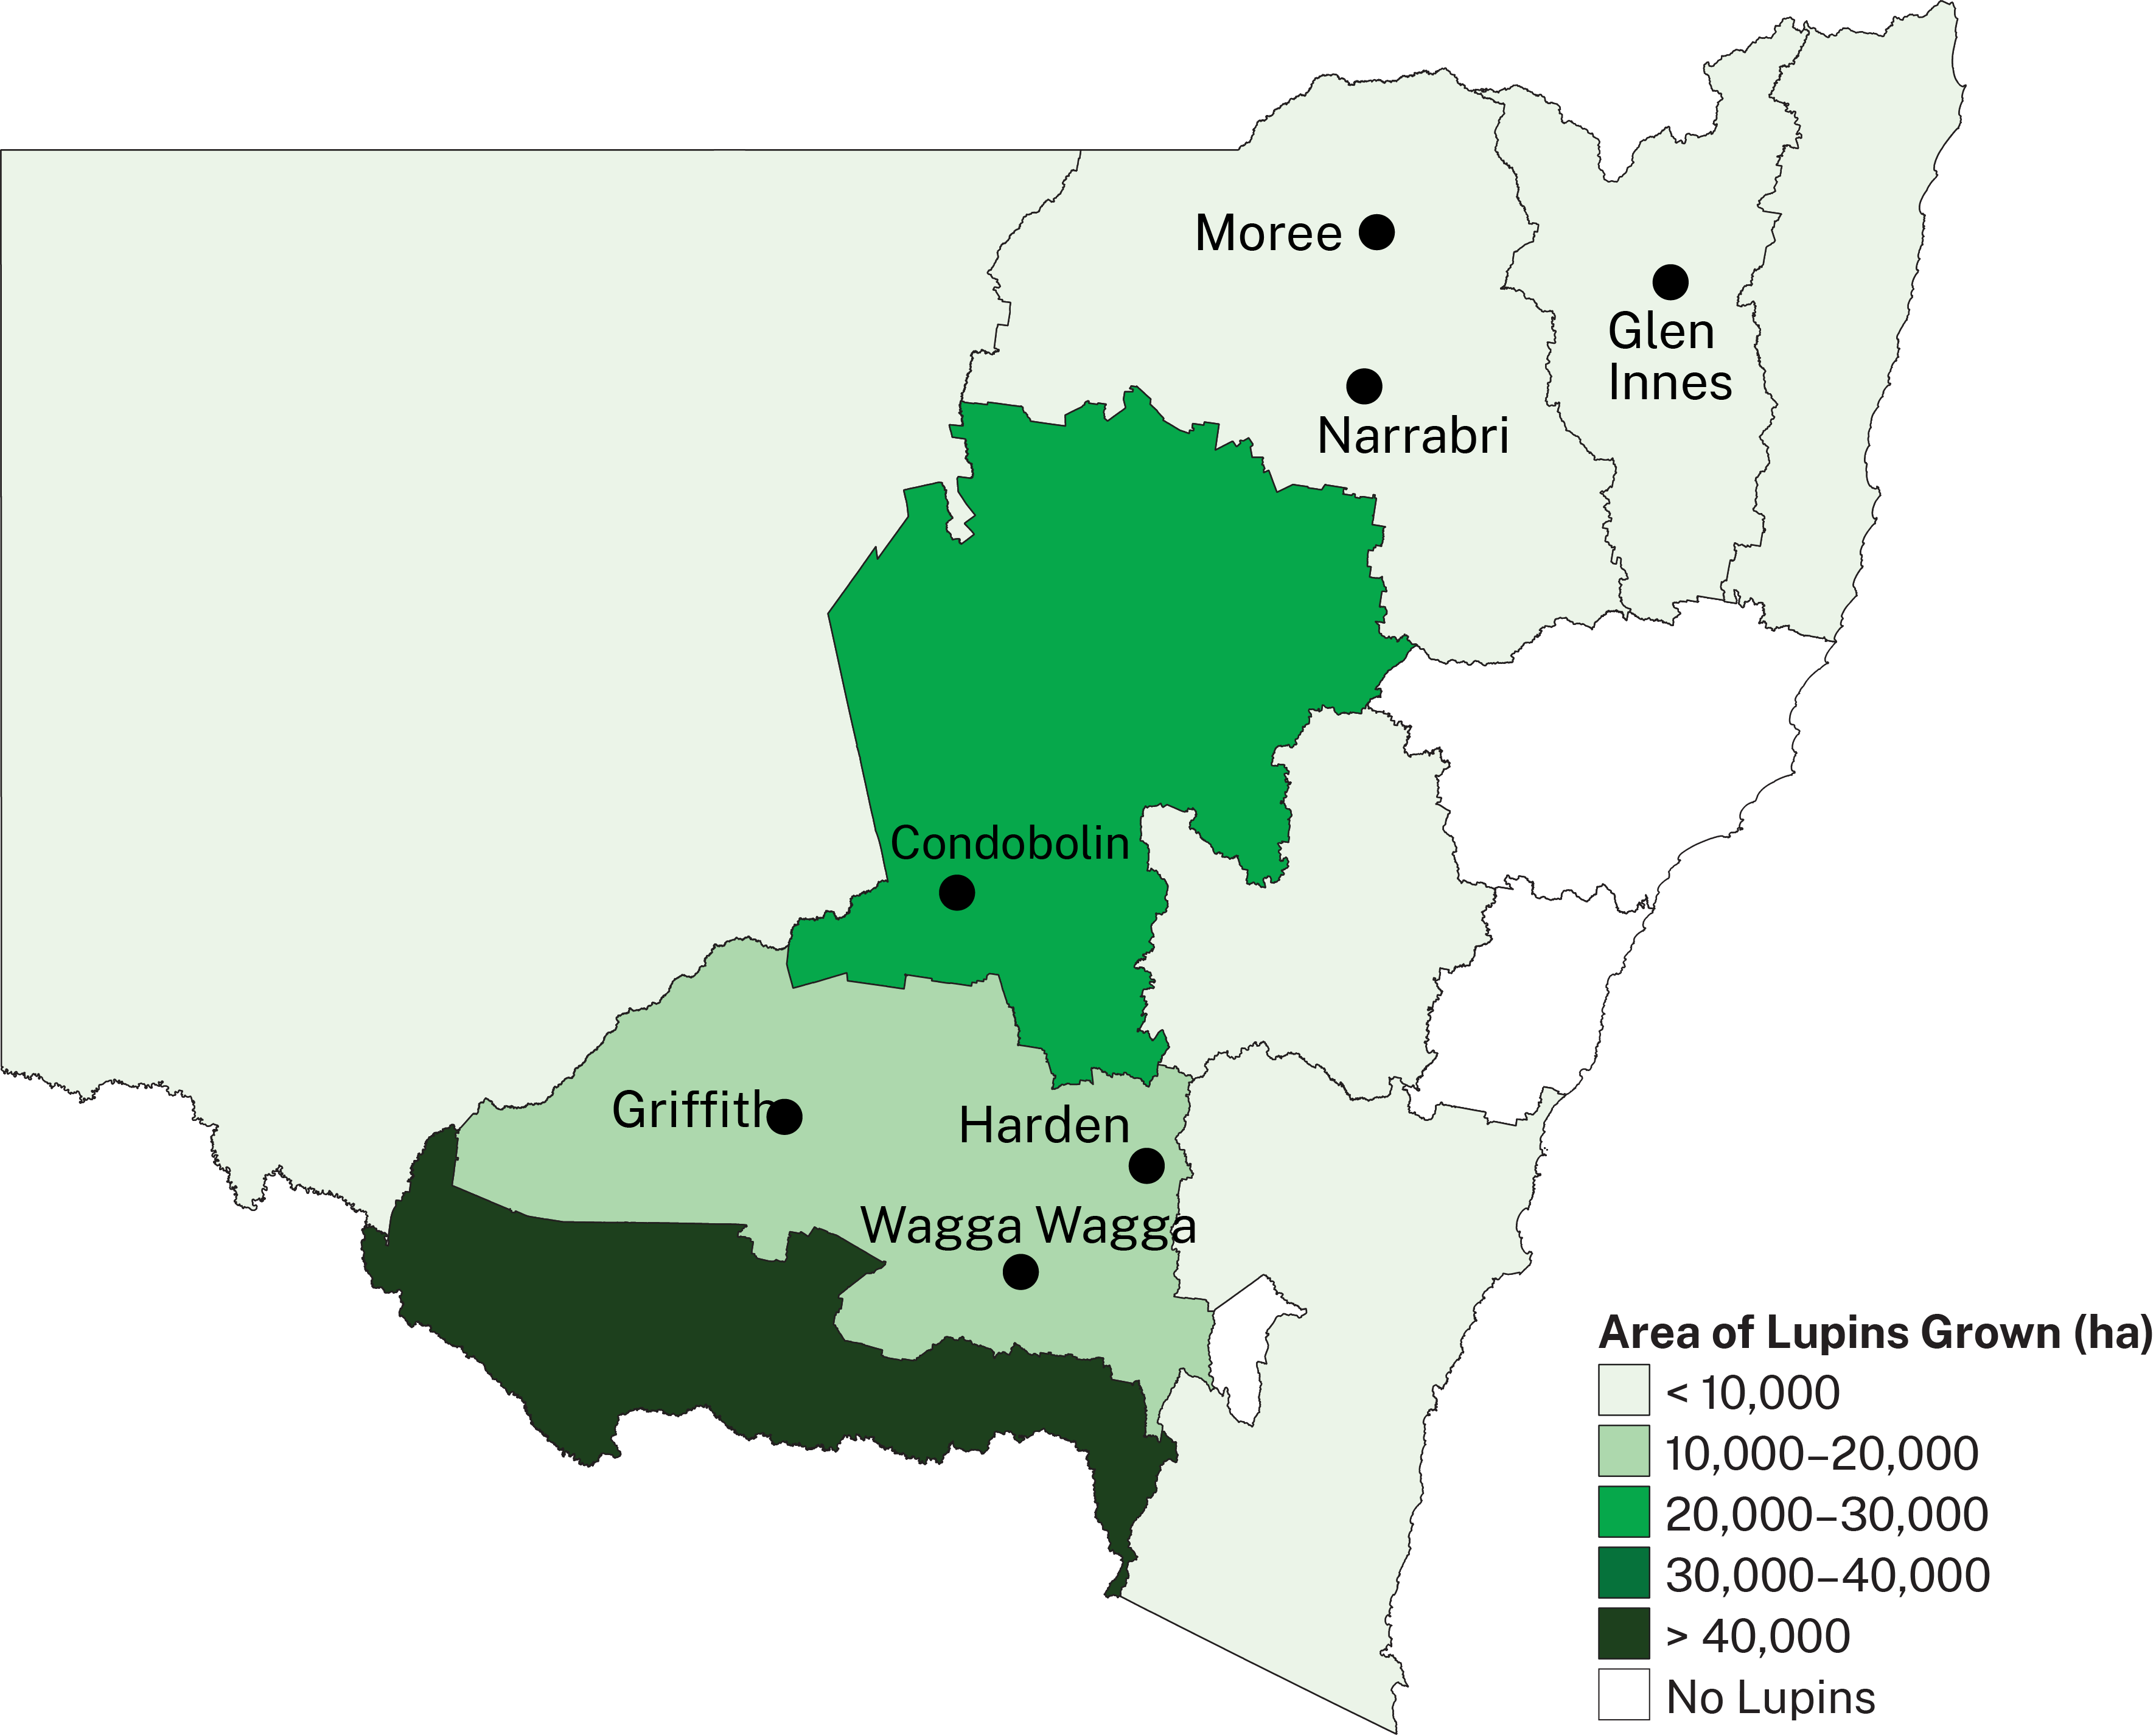 Lupin growing in NSW is concentrated in the central south of the state, extending northward west of the Great Dividing Range.